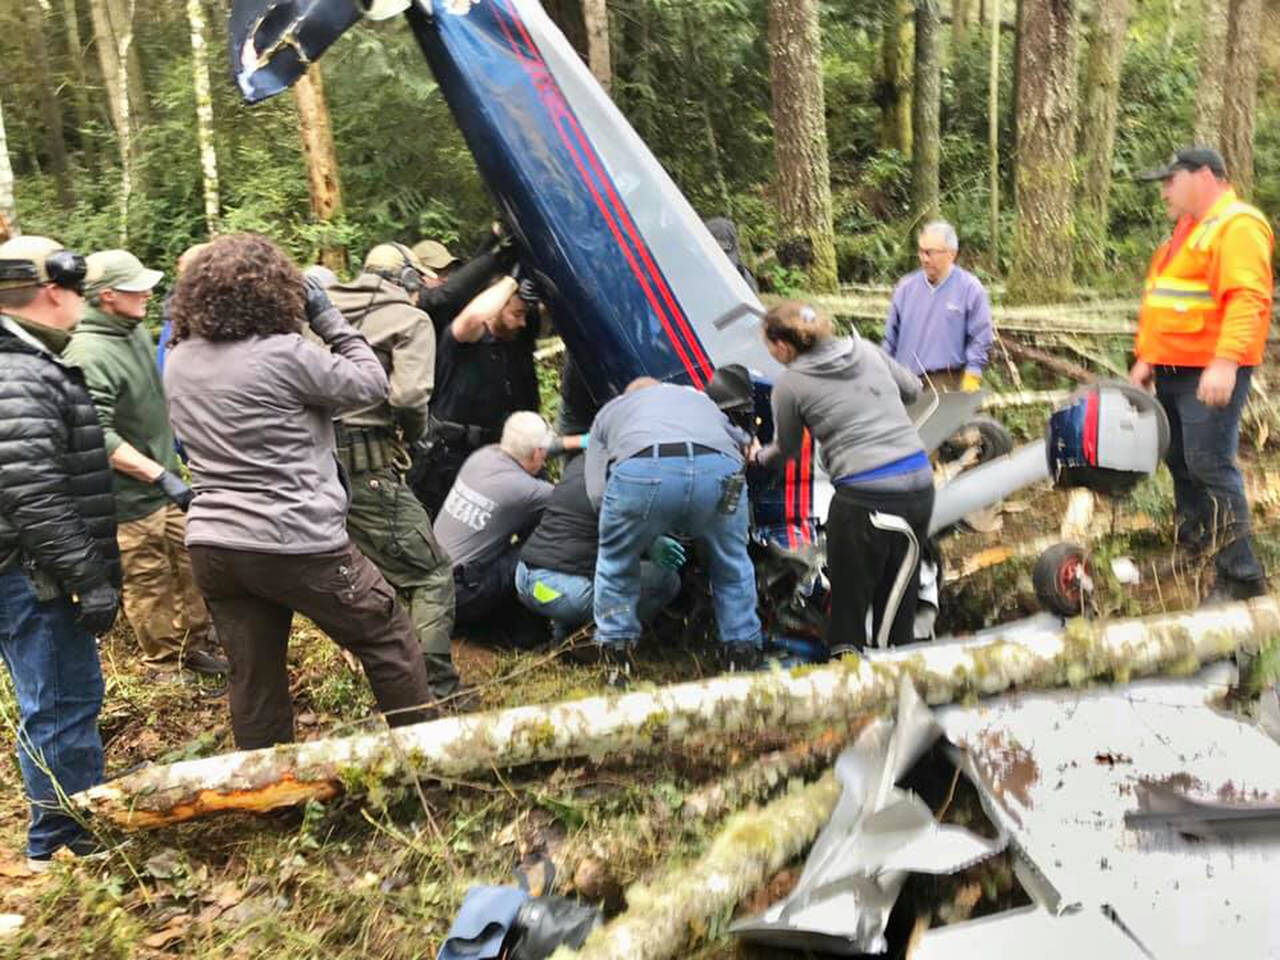 South Whidbey Fire/EMS responders were called to the site of a plane crash at Whidbey Airpark in Langley on Saturday morning. (South Whidbey Fire/EMS)